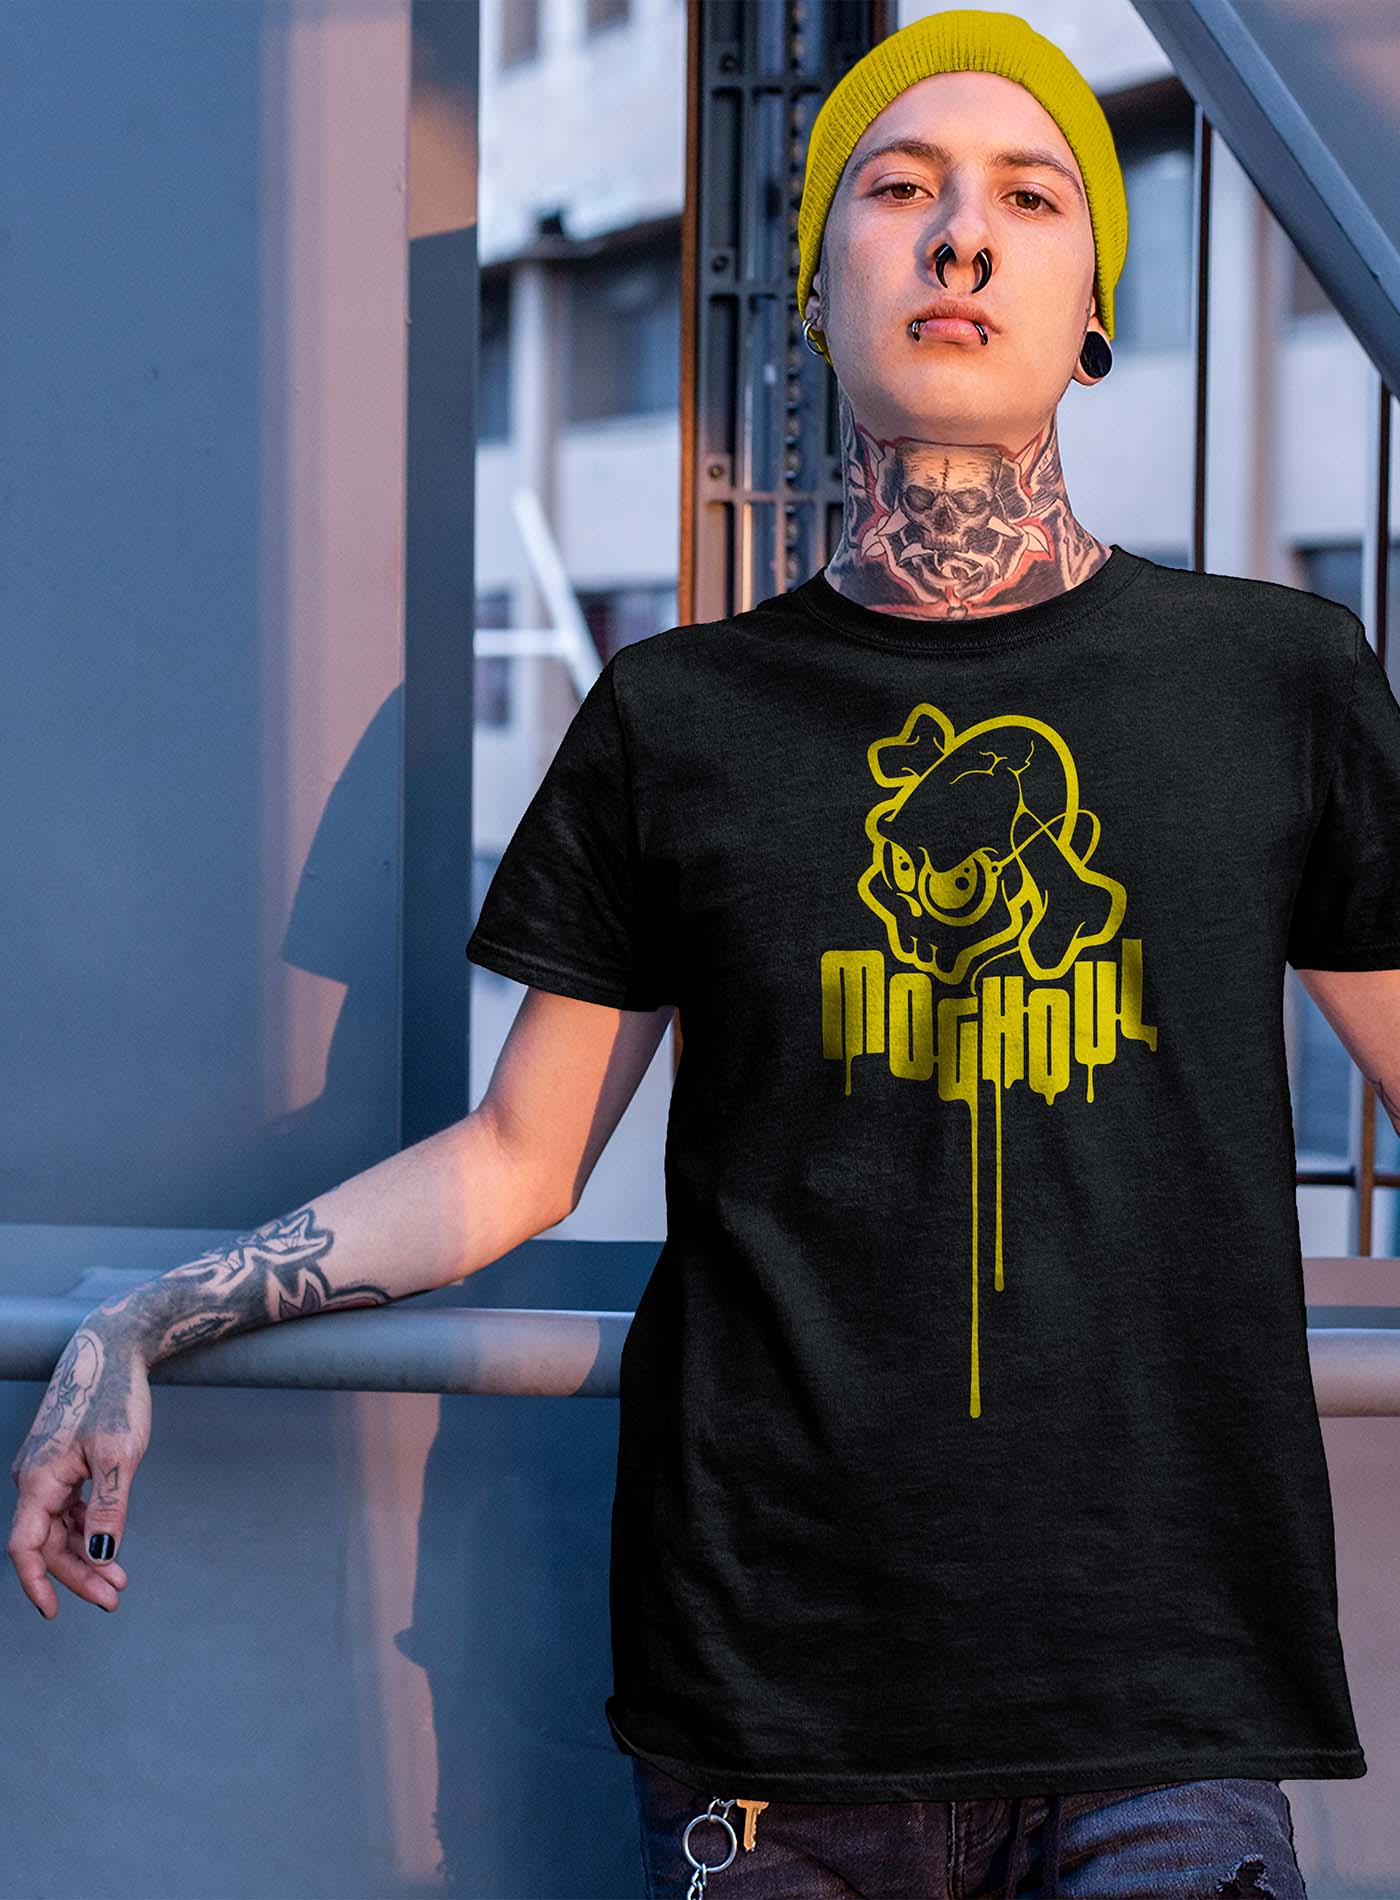 guy modeling a Heather black unisex t-shirt featuring a yellow Mr. Shade Moghoul logo by G.M. Meave.